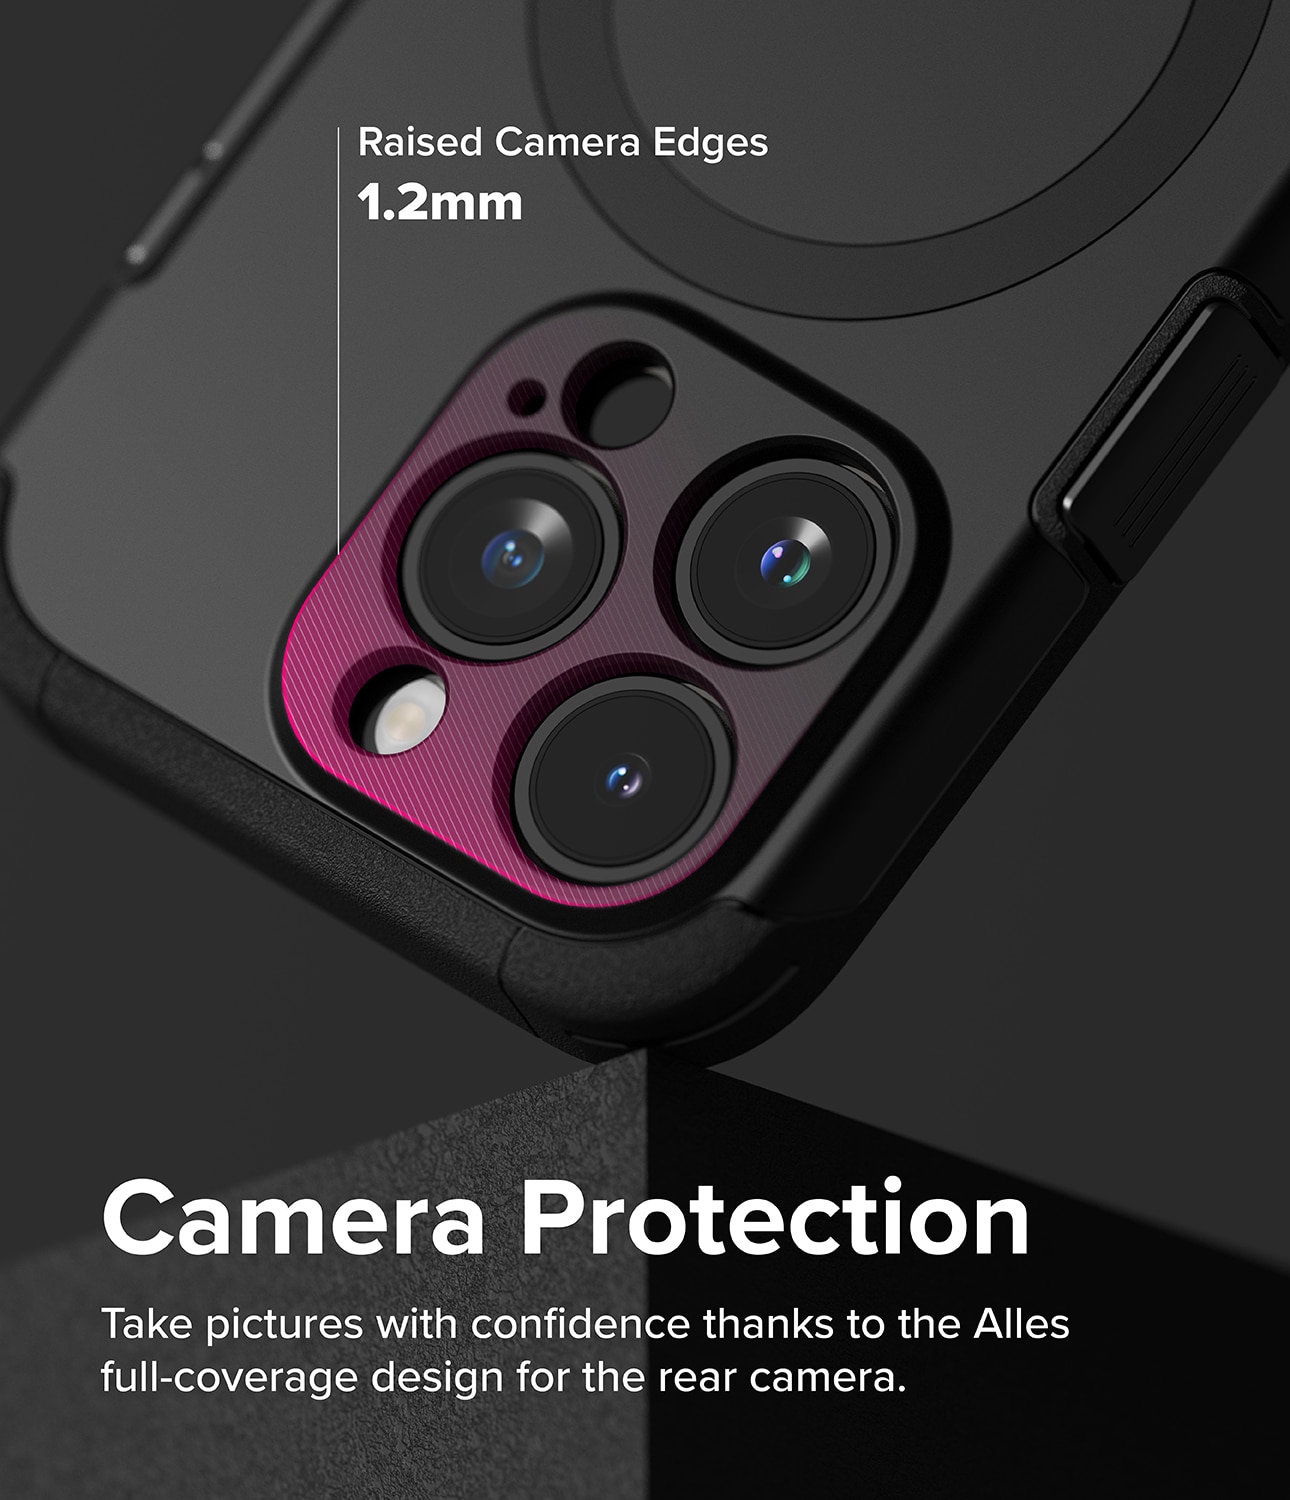 Alles Magnetic Cover iPhone 15 Pro nero